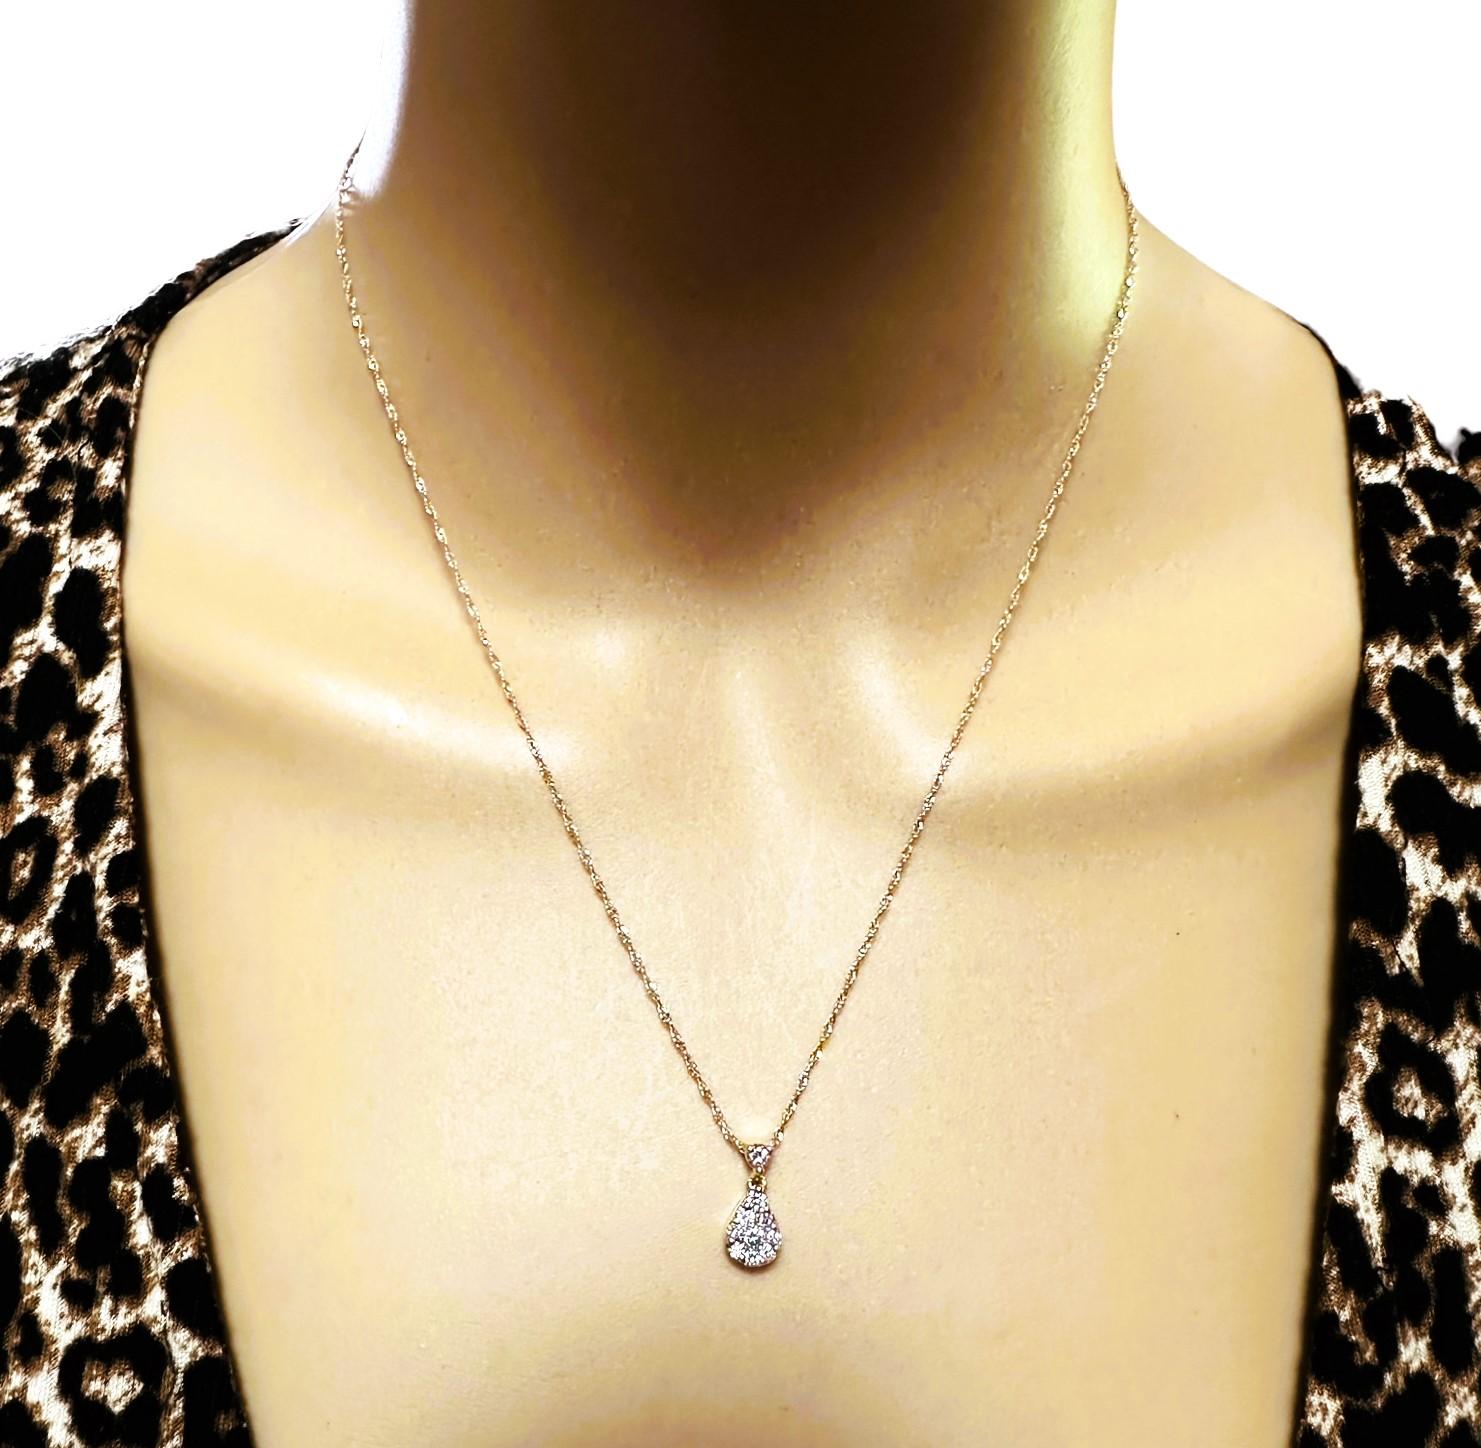 This pendant is just so beautiful!!  I just love the teardrop design .  And it's on a beautiful chain.  It has 10 Brilliant cut diamonds the largest being approximately 2.5 mm.  They are just bright and sparkly.  It is on a very well-made 14k Yellow